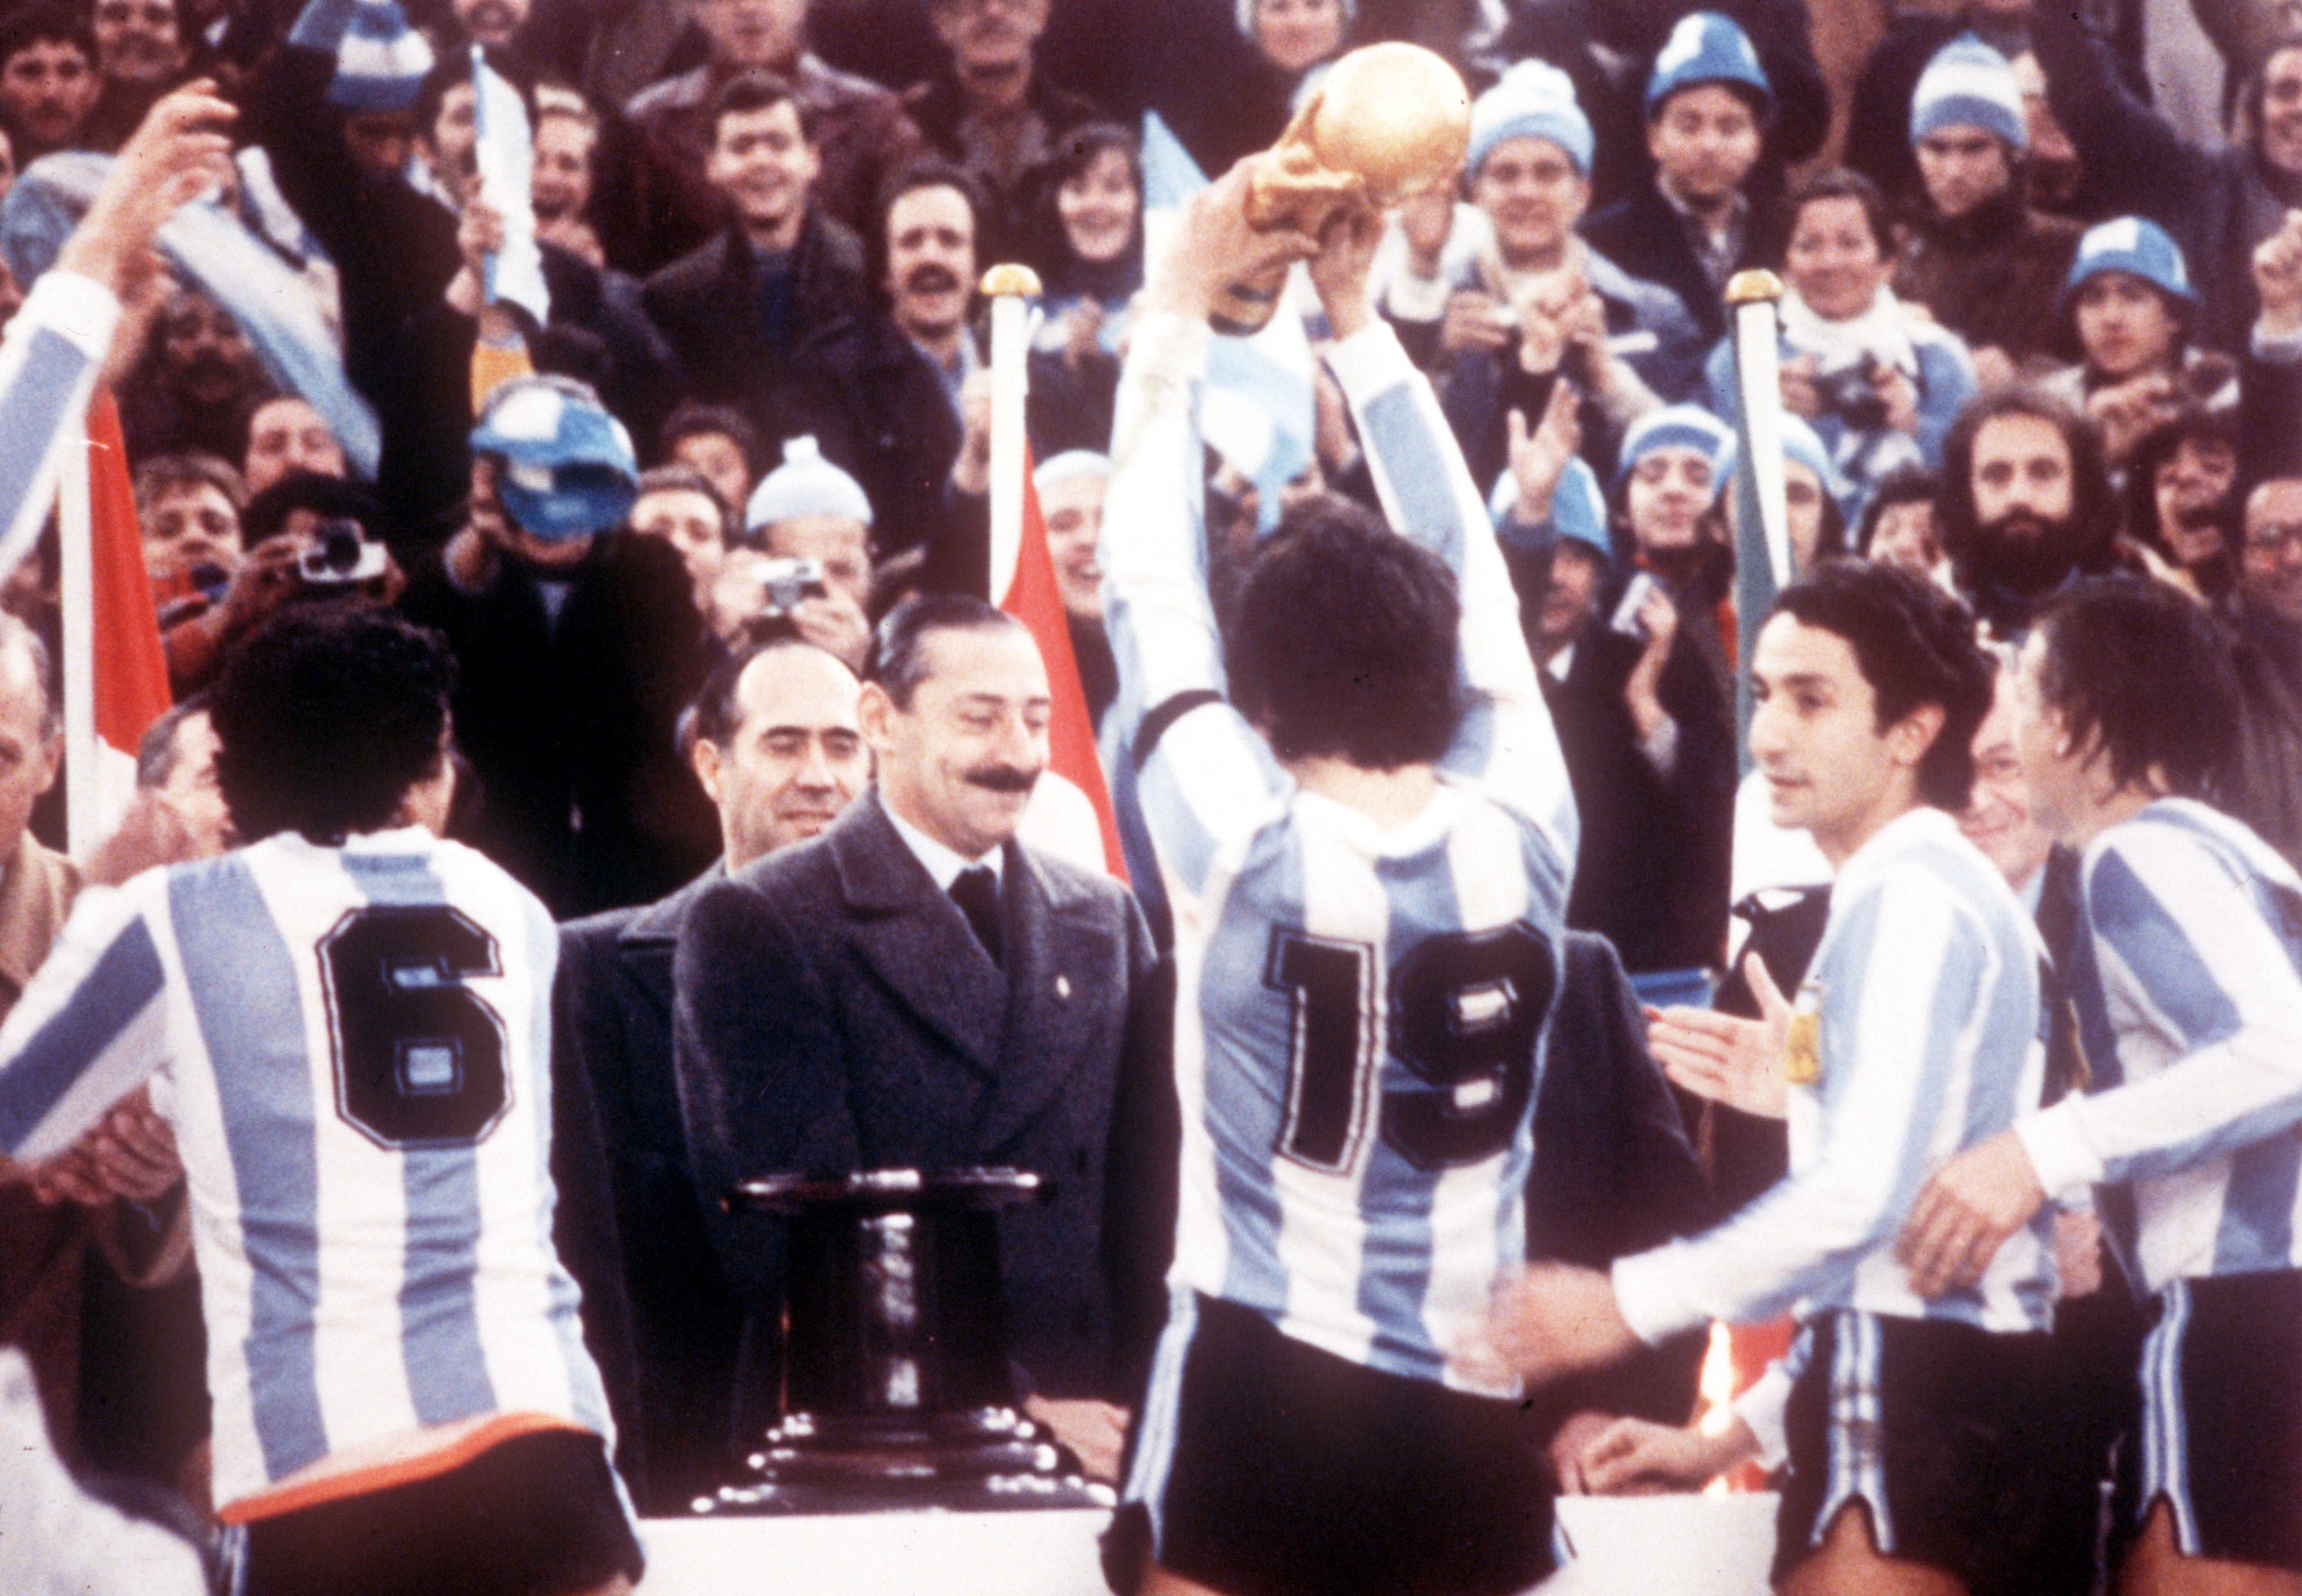 Argentine dictator Jorge Rafael Videla presents the World Cup to Argentina captain Daniel Passarella on 25 June 1978. Other players pictured include former Spurs player Osvaldo Ardiles (second right). Argentina beat Holland 3-1 in the final